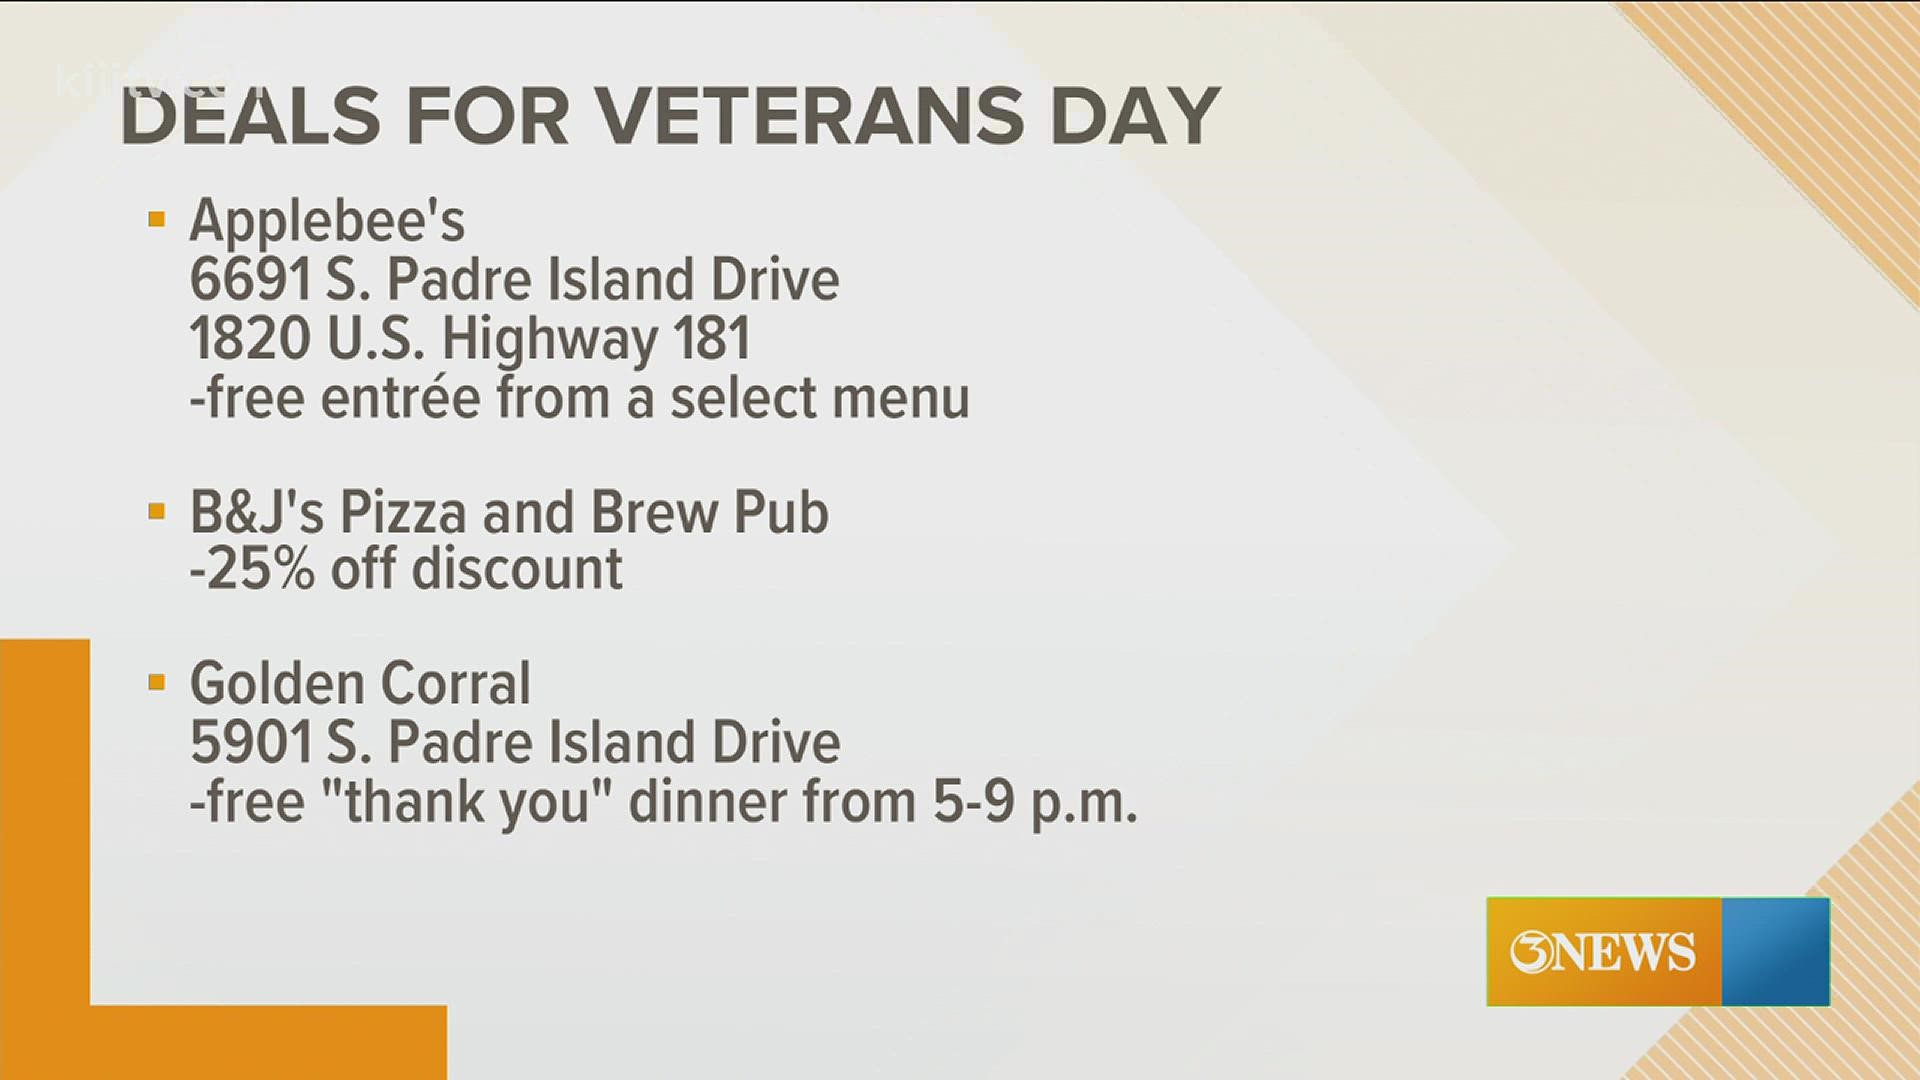 In honor of Veterans Day, several businesses are showing their respect by offering discounted services.